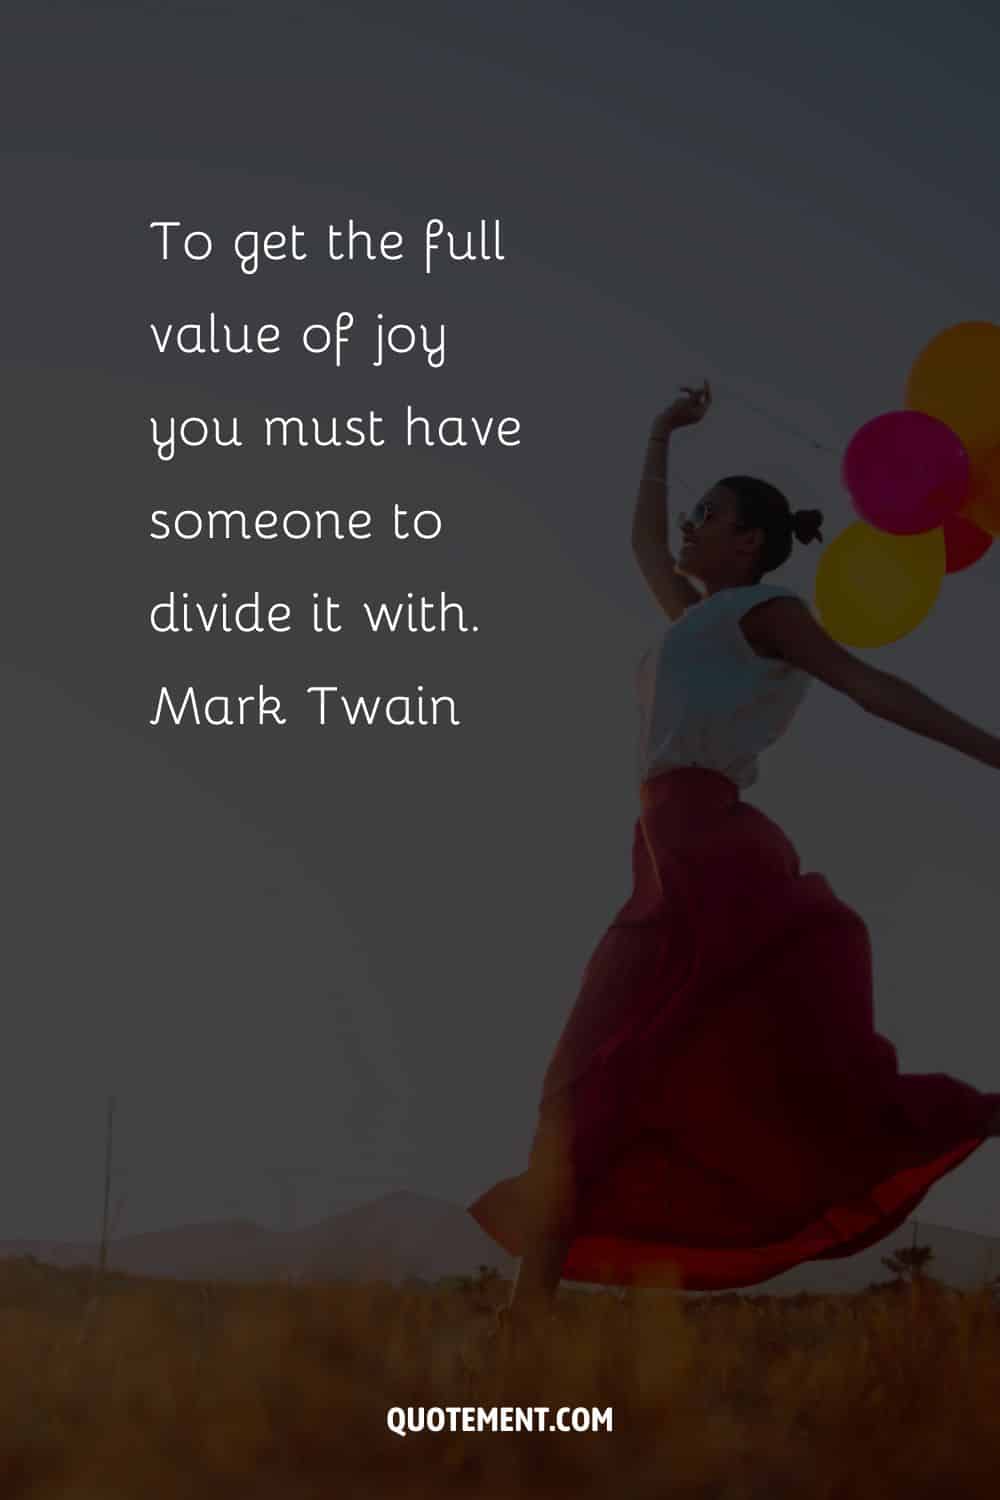 To get the full value of joy you must have someone to divide it with